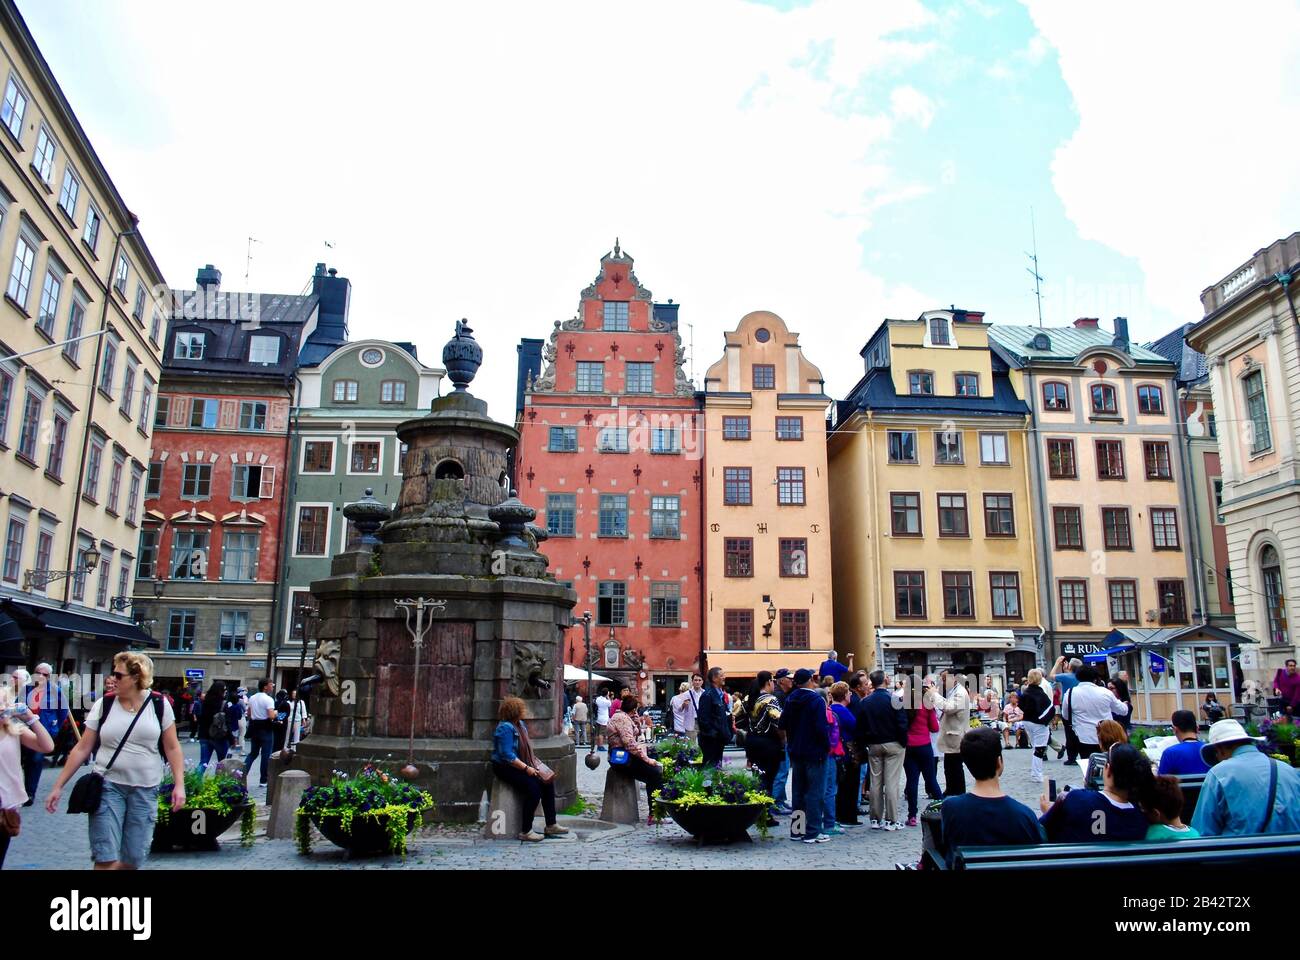 Traditional colorful houses in Old Town square of Stortorget square in Gamla Stan. It is the oldest square in Stockholm, Sweden. tourist destination Stock Photo